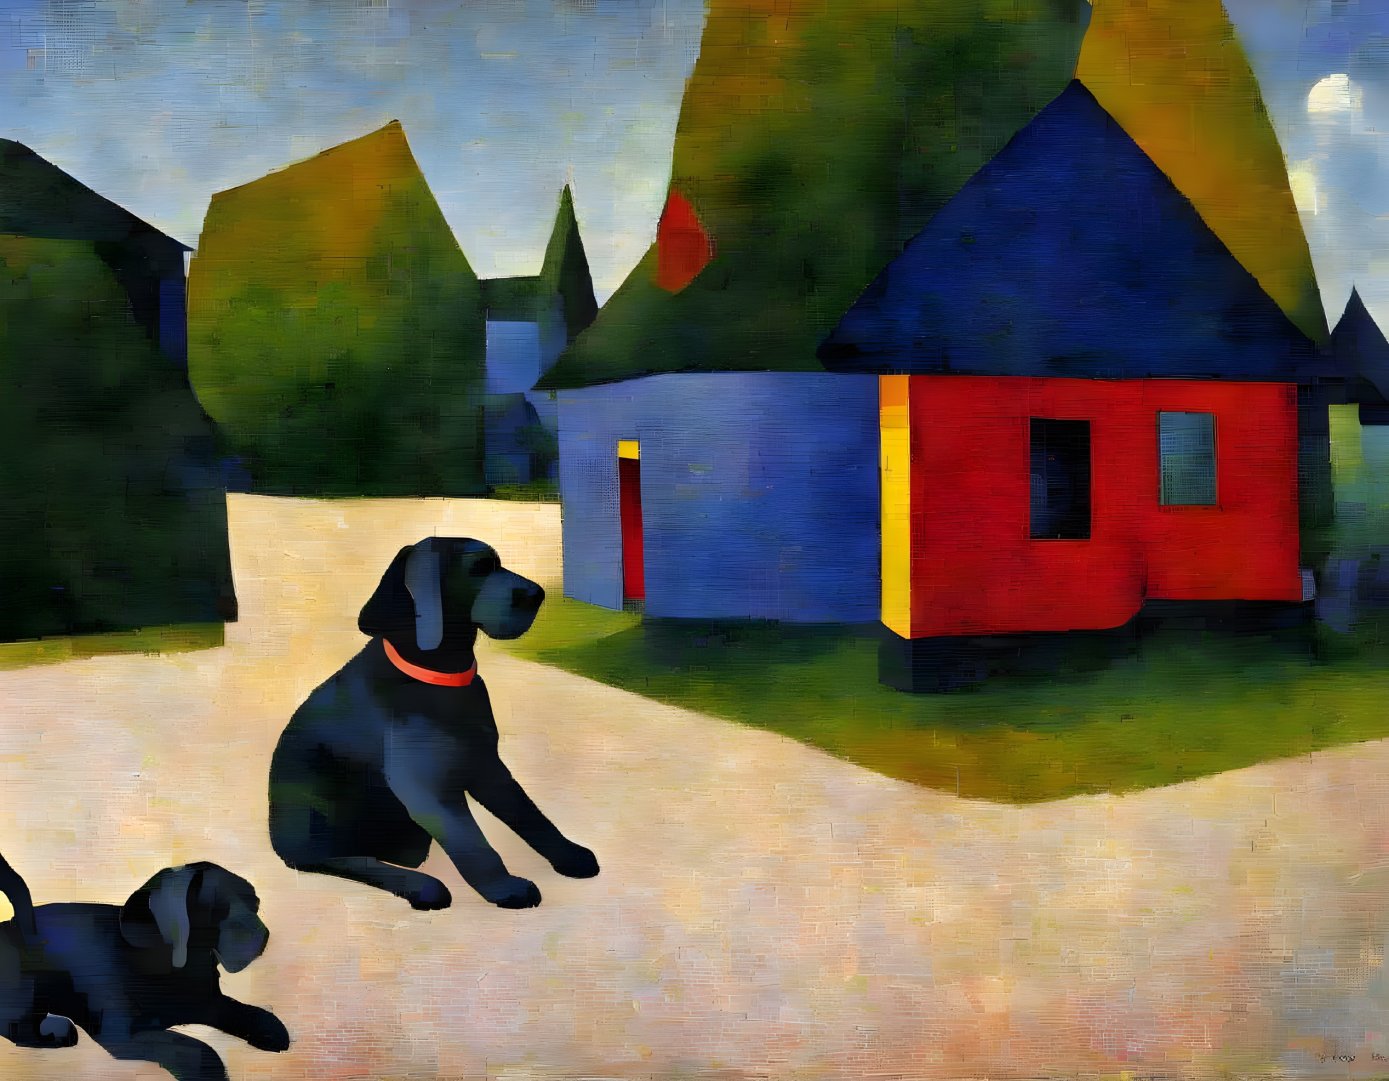 Two Black Dogs Sitting Among Colorful Houses on Path